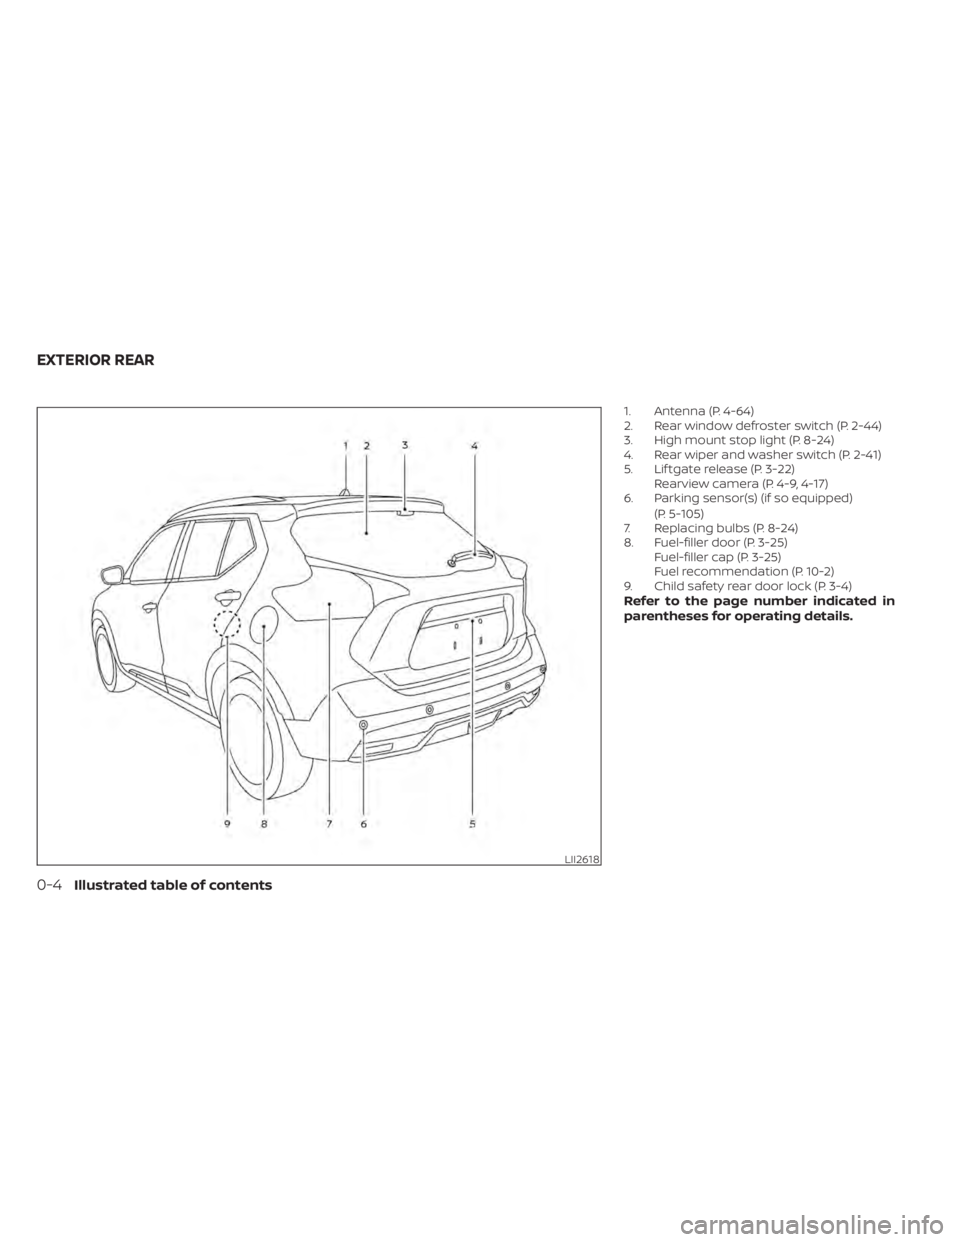 NISSAN KICKS 2022  Owners Manual 1. Antenna (P. 4-64)
2. Rear window defroster switch (P. 2-44)
3. High mount stop light (P. 8-24)
4. Rear wiper and washer switch (P. 2-41)
5. Lif tgate release (P. 3-22)Rearview camera (P. 4-9, 4-17)